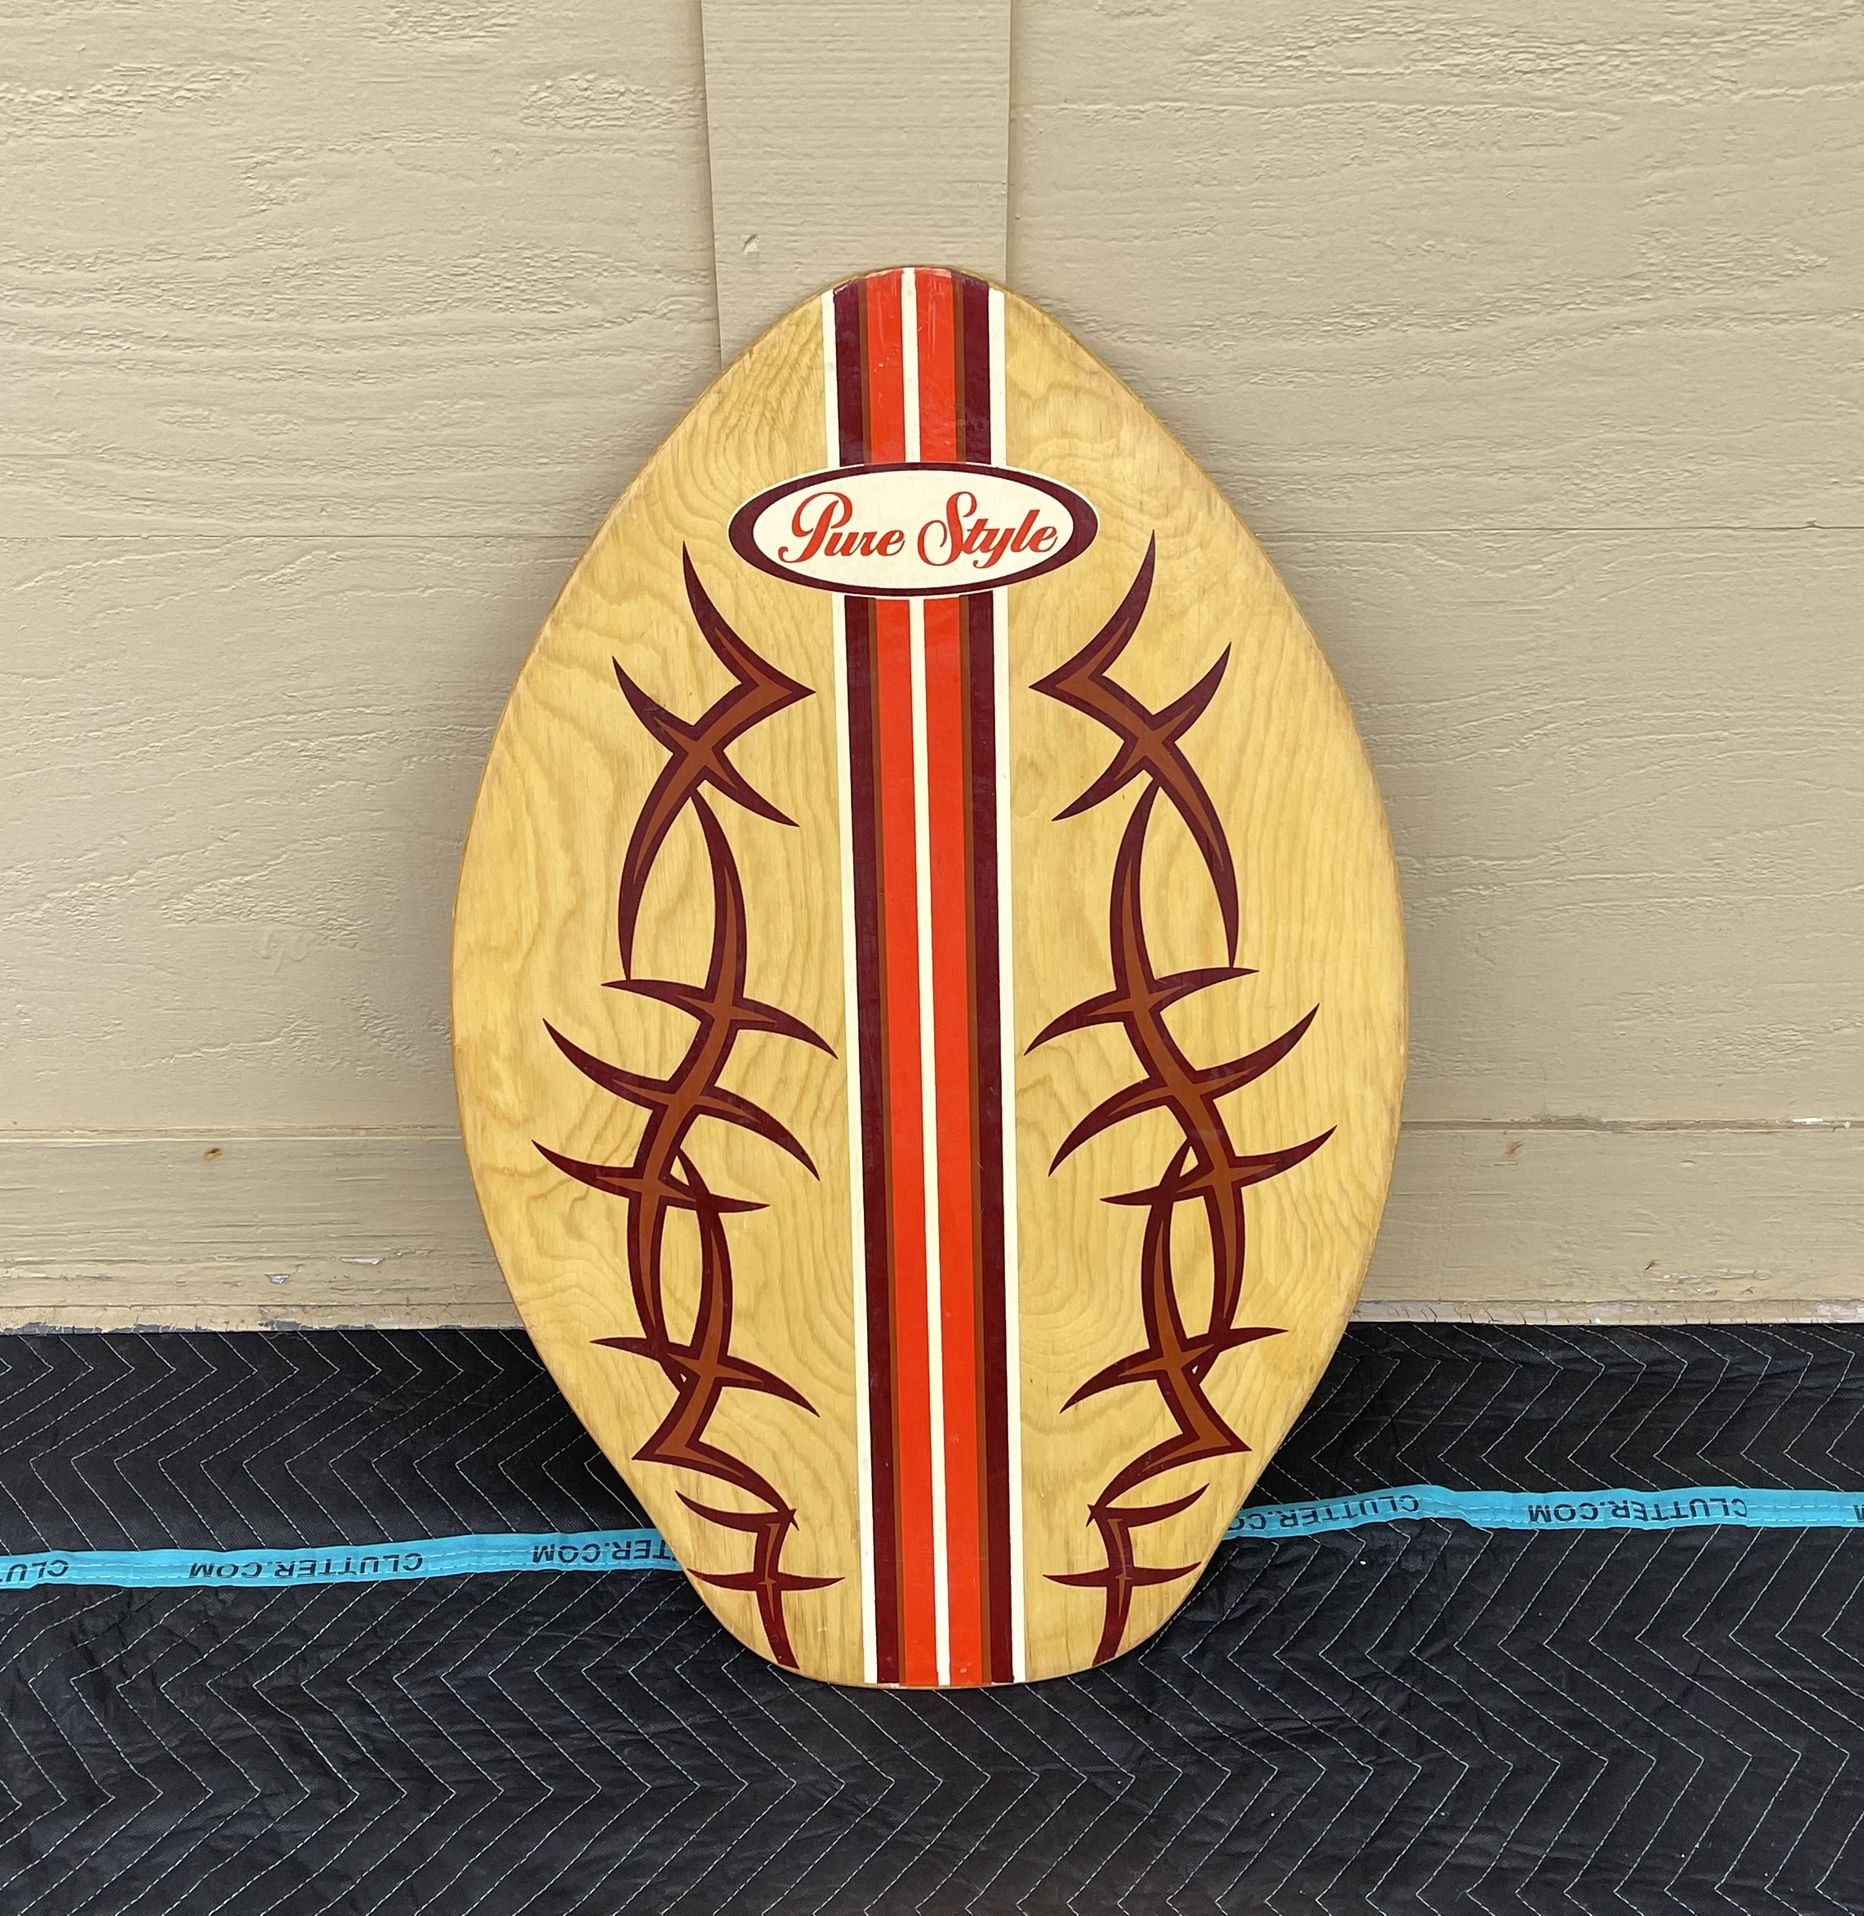 30” Pure Style Wooden Vintage Style Skim Board